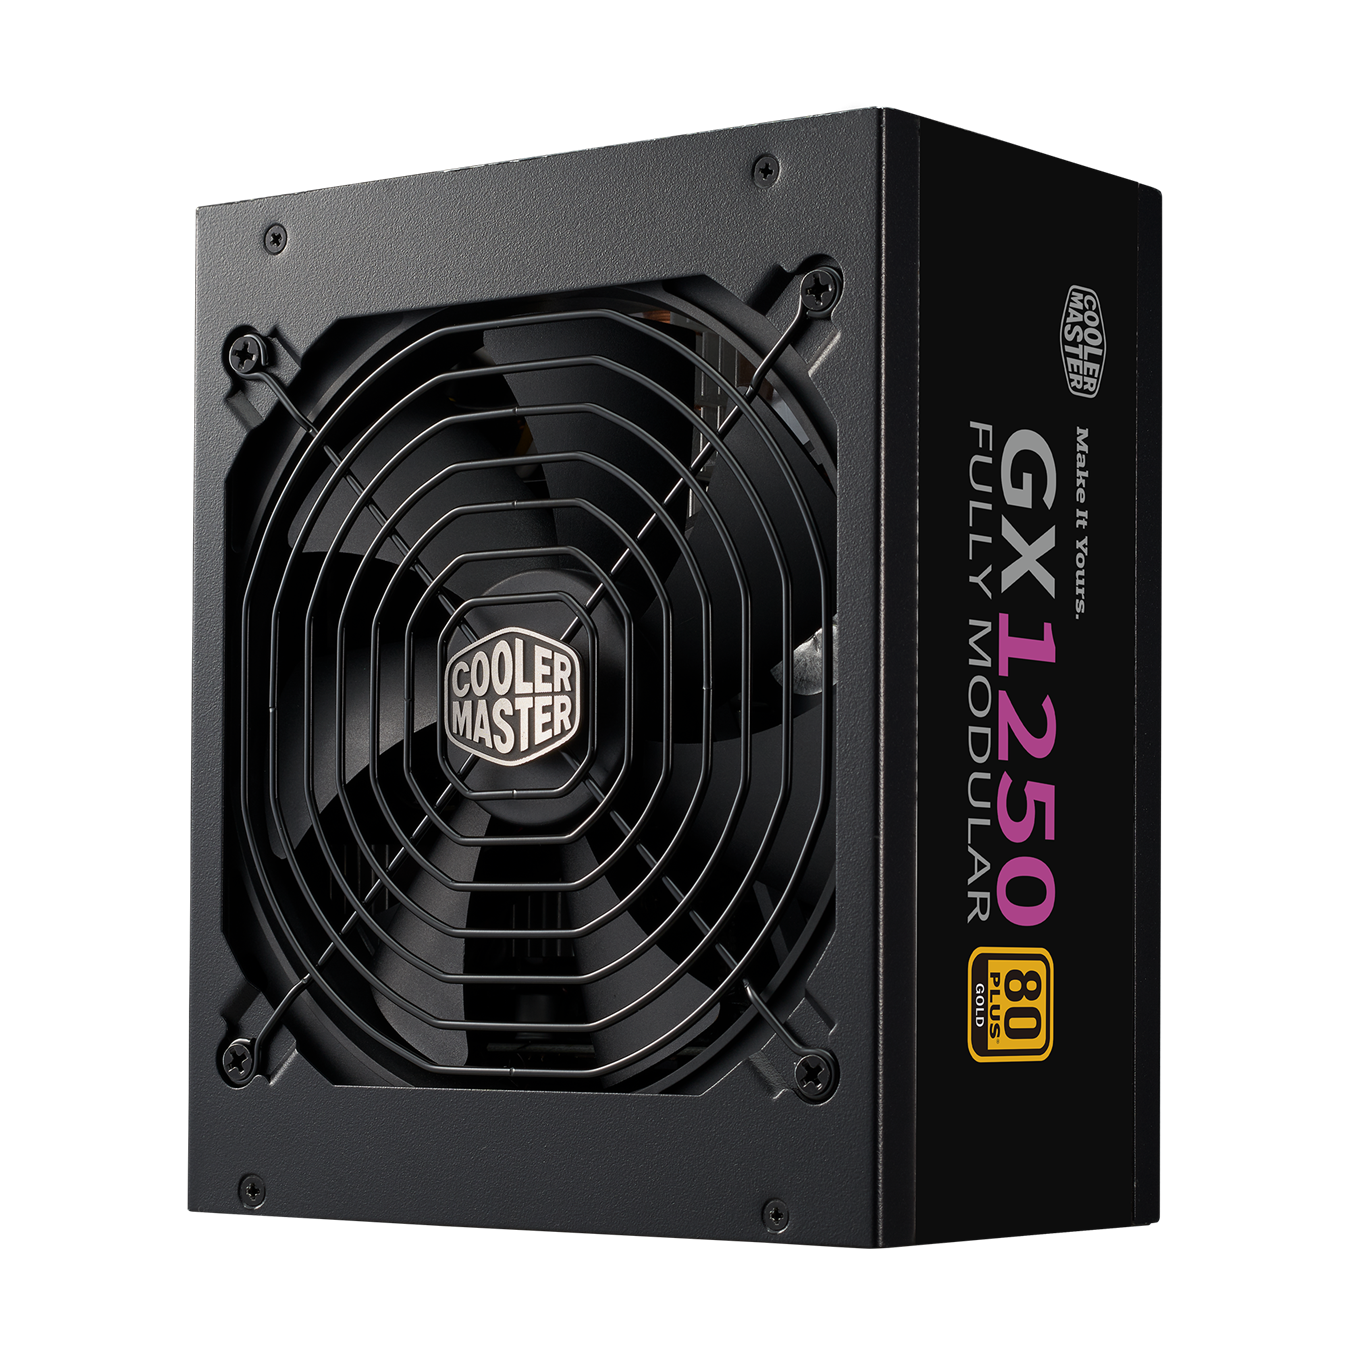 GX Gold 1250 brings optimal performance for a classic configuration.